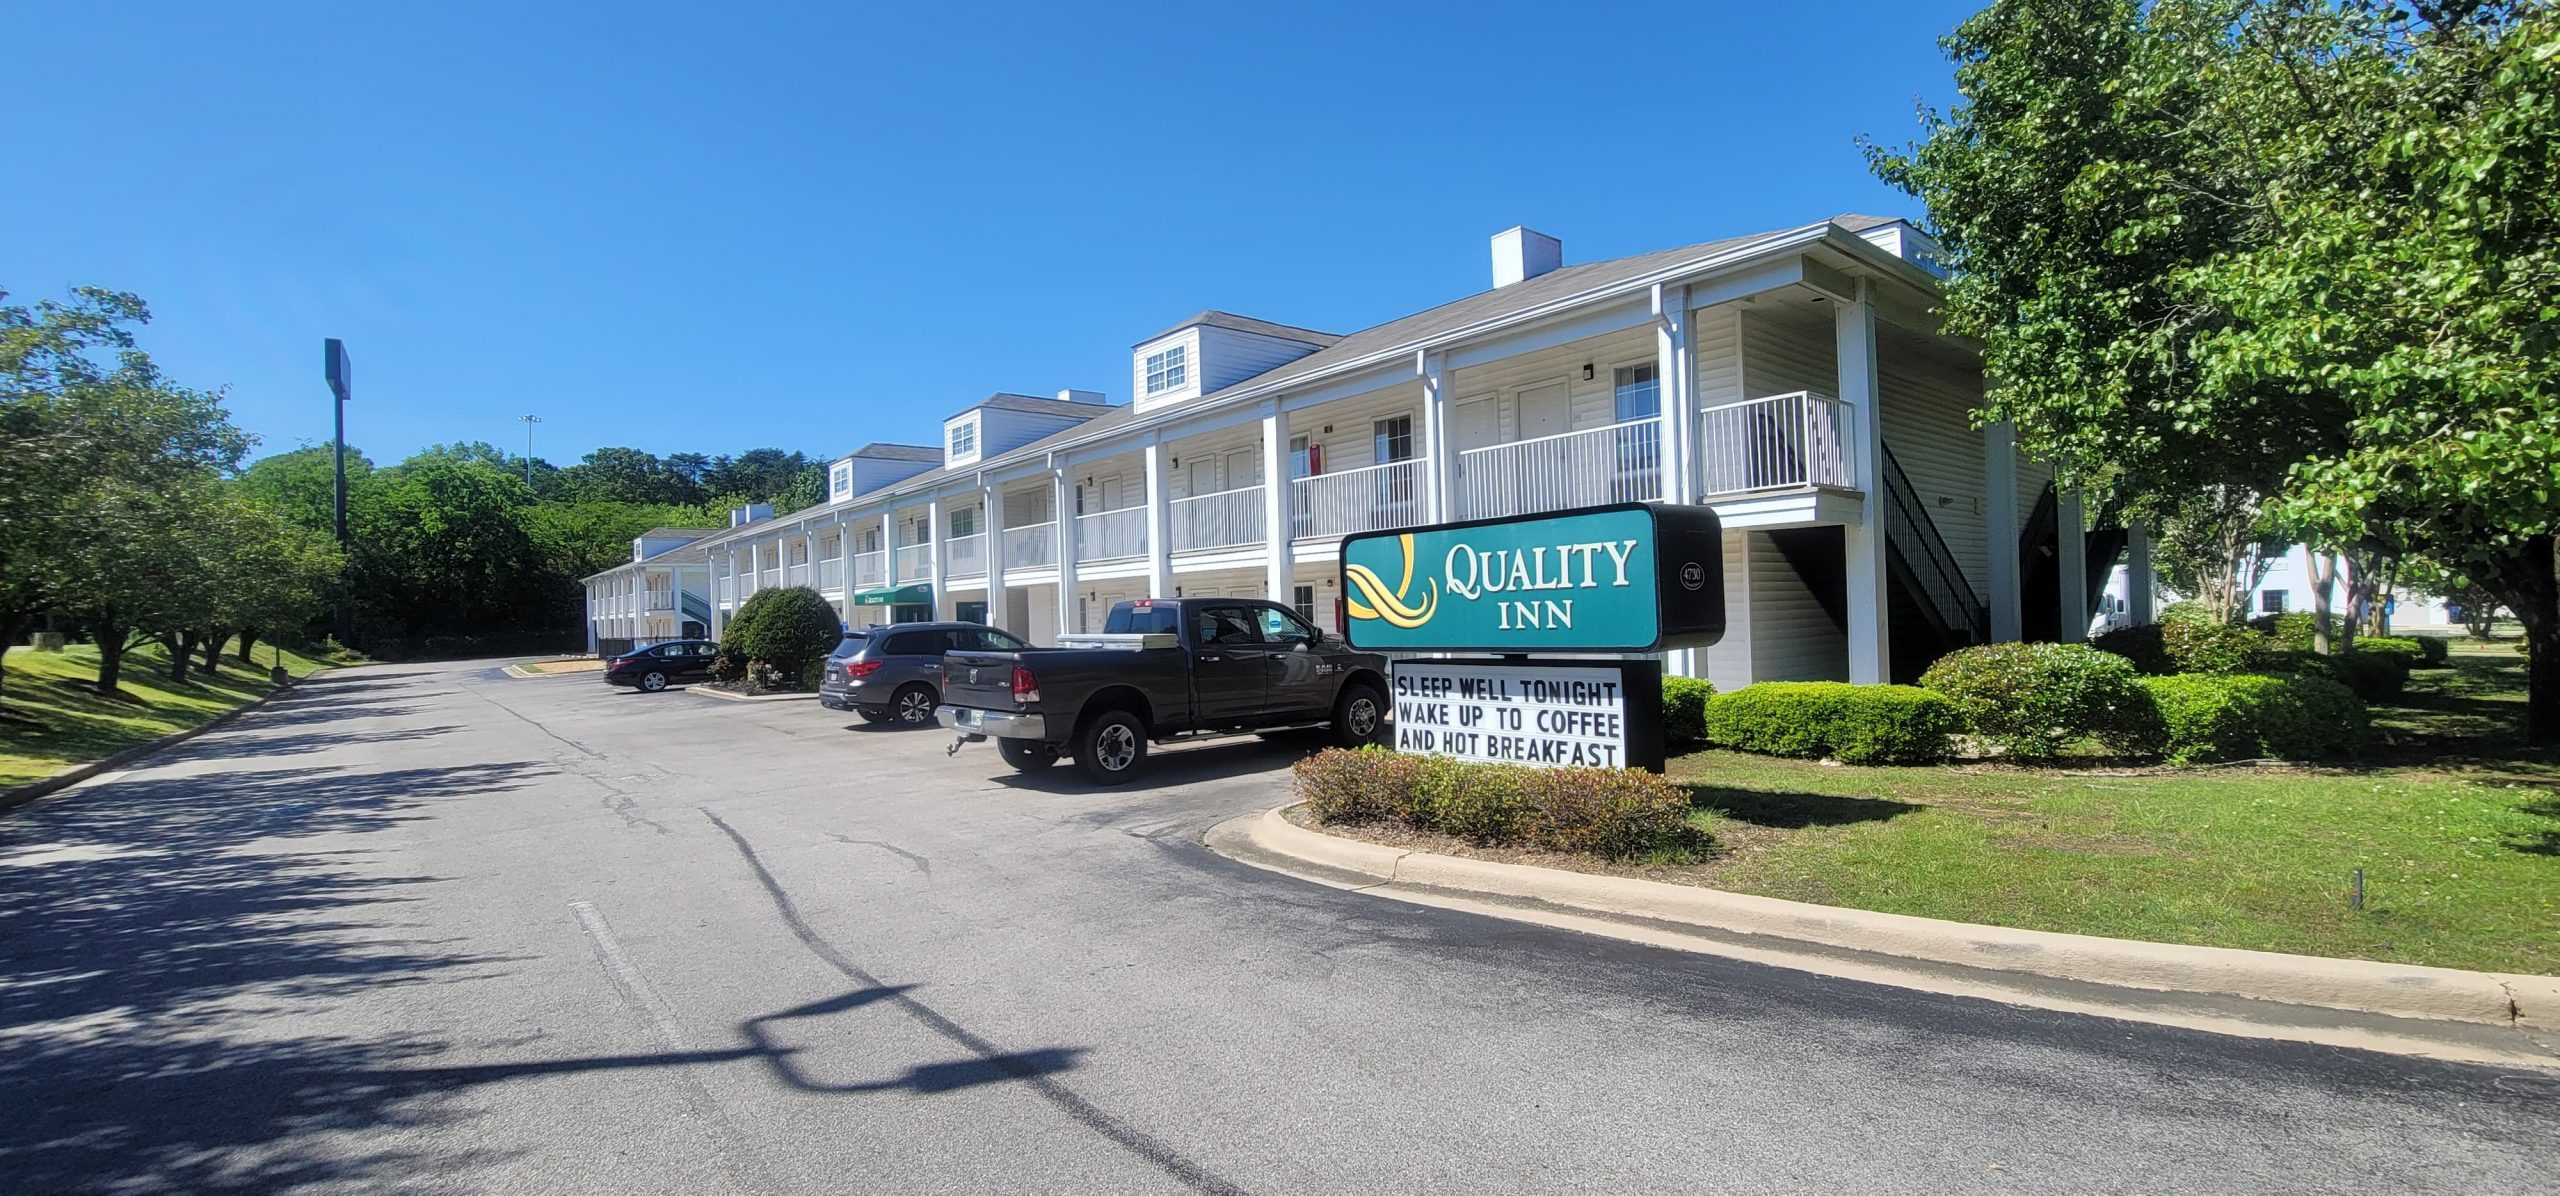 More arrests made as police focus on increased drug activity at Quality Inn Trussville